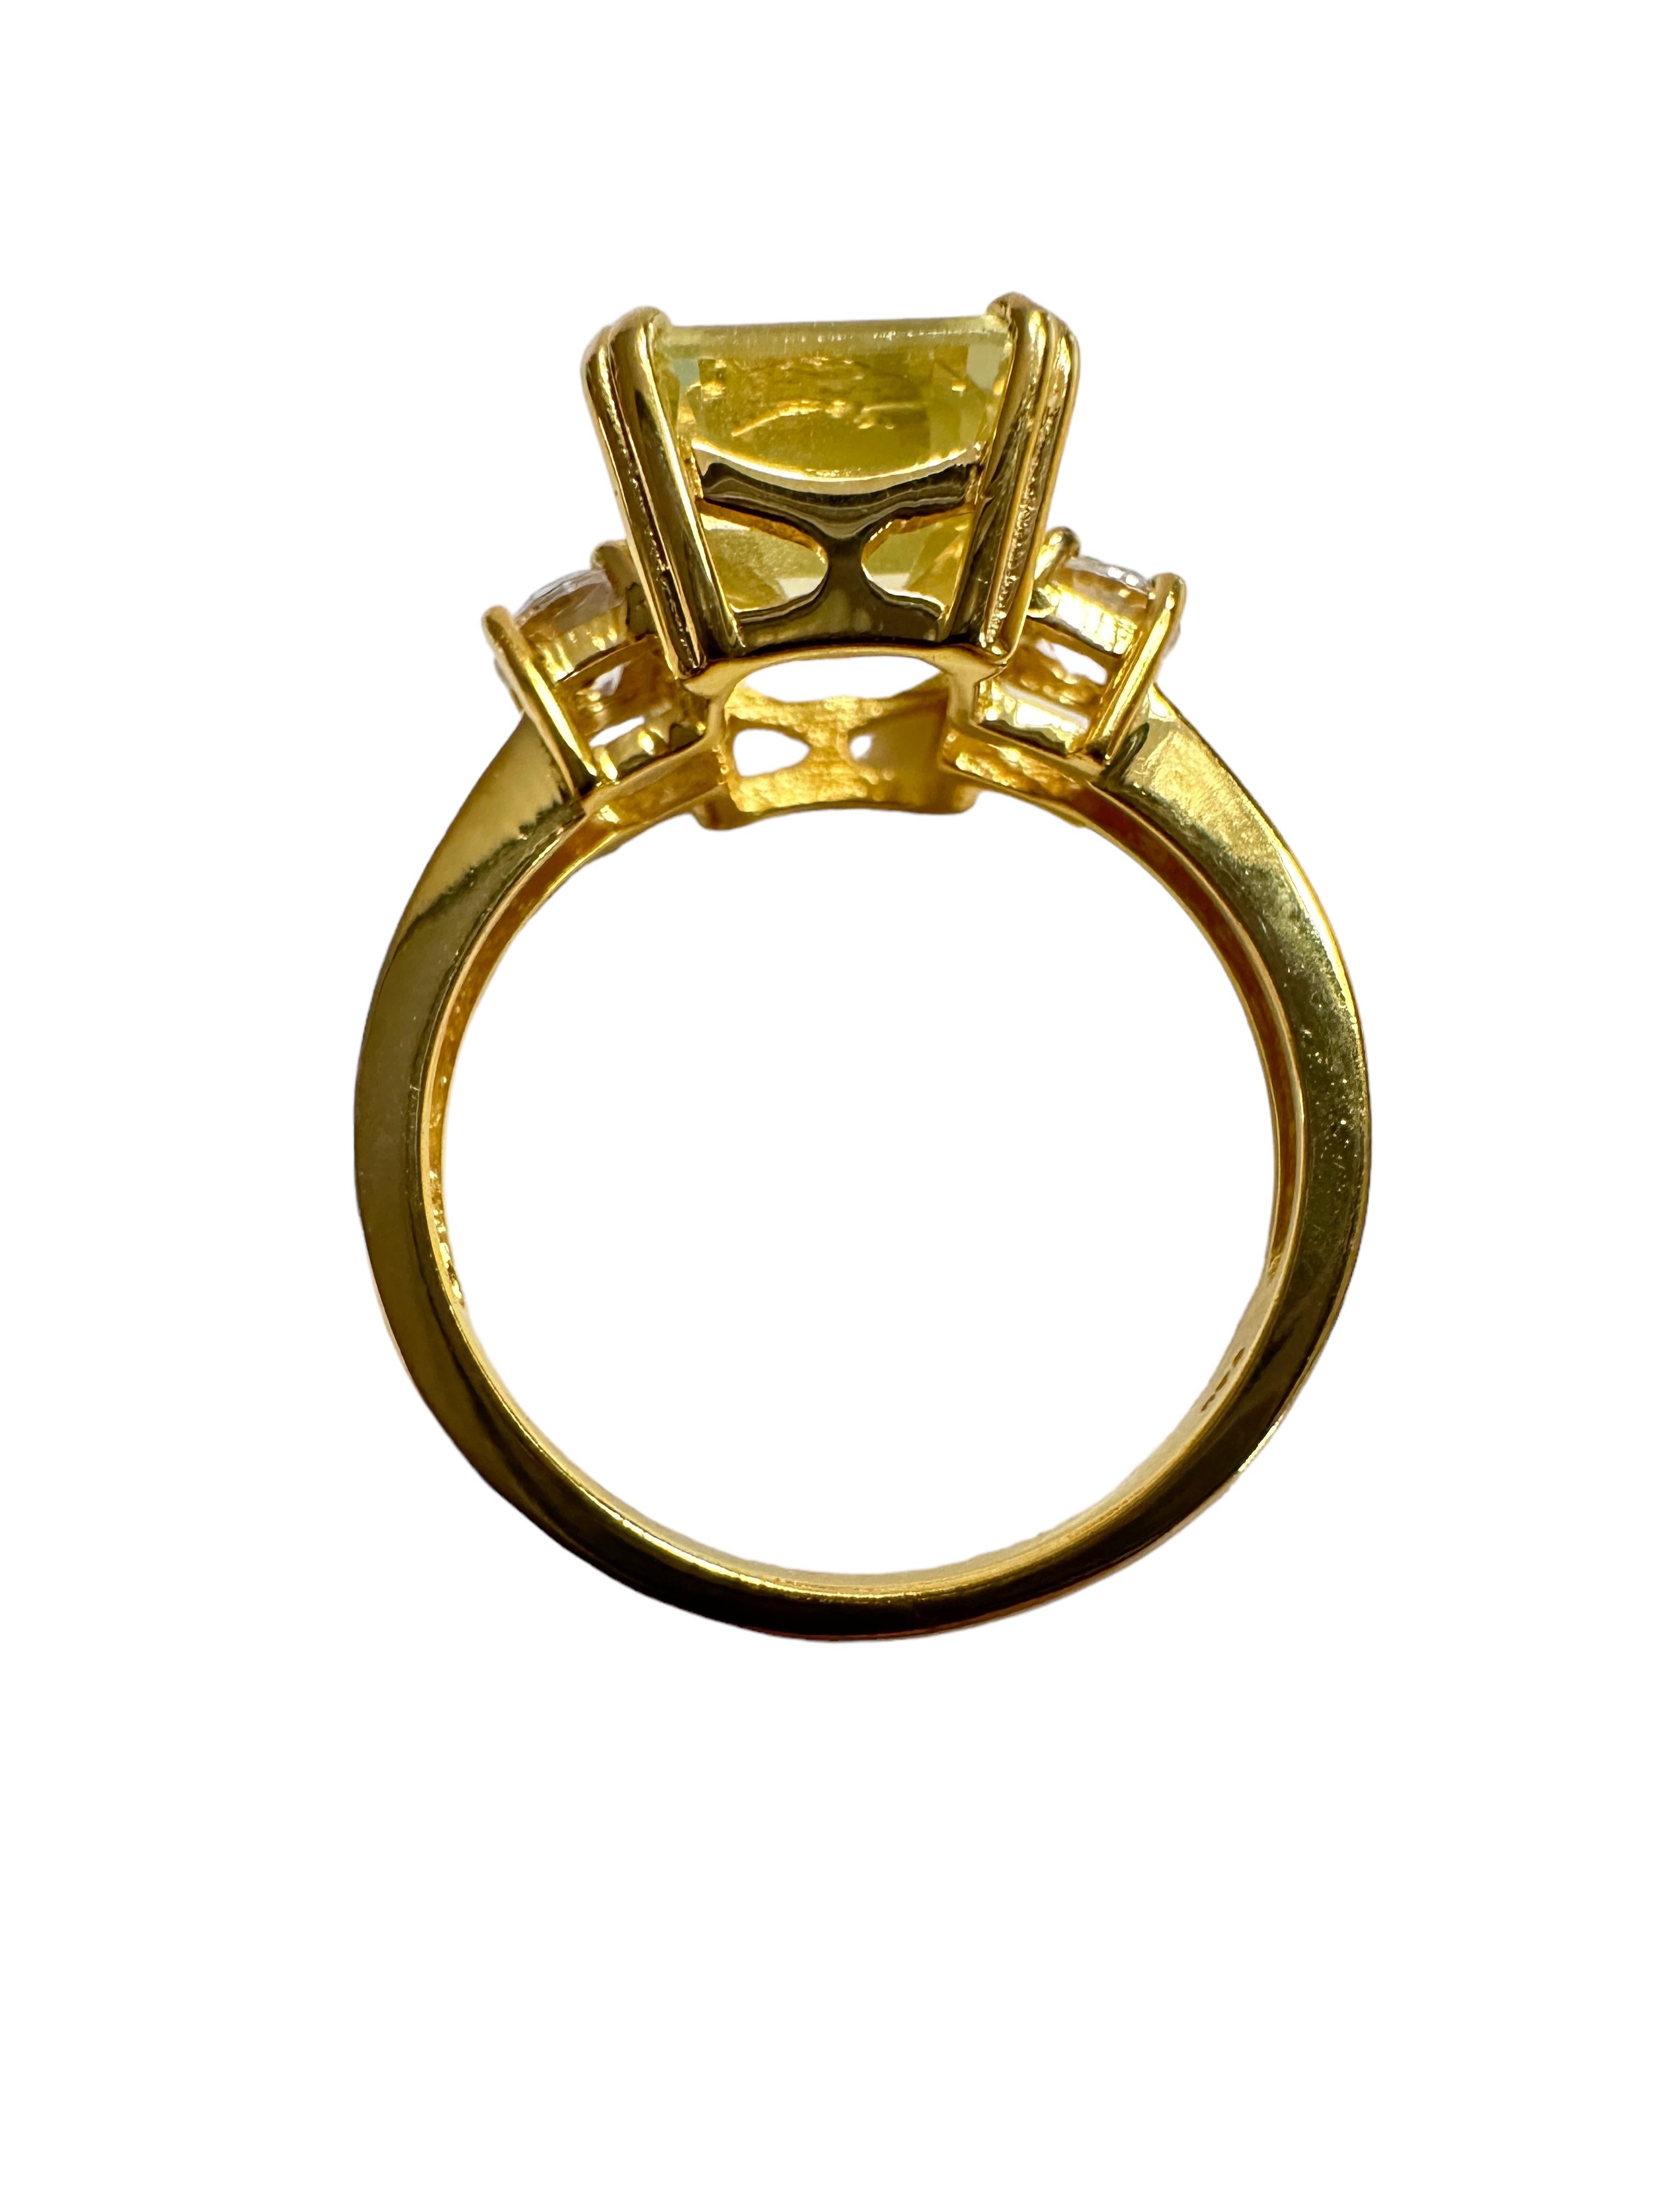 New African 5.2 ct Peridot Yellow & White Sapphire YGold Plated Sterling Ring 1